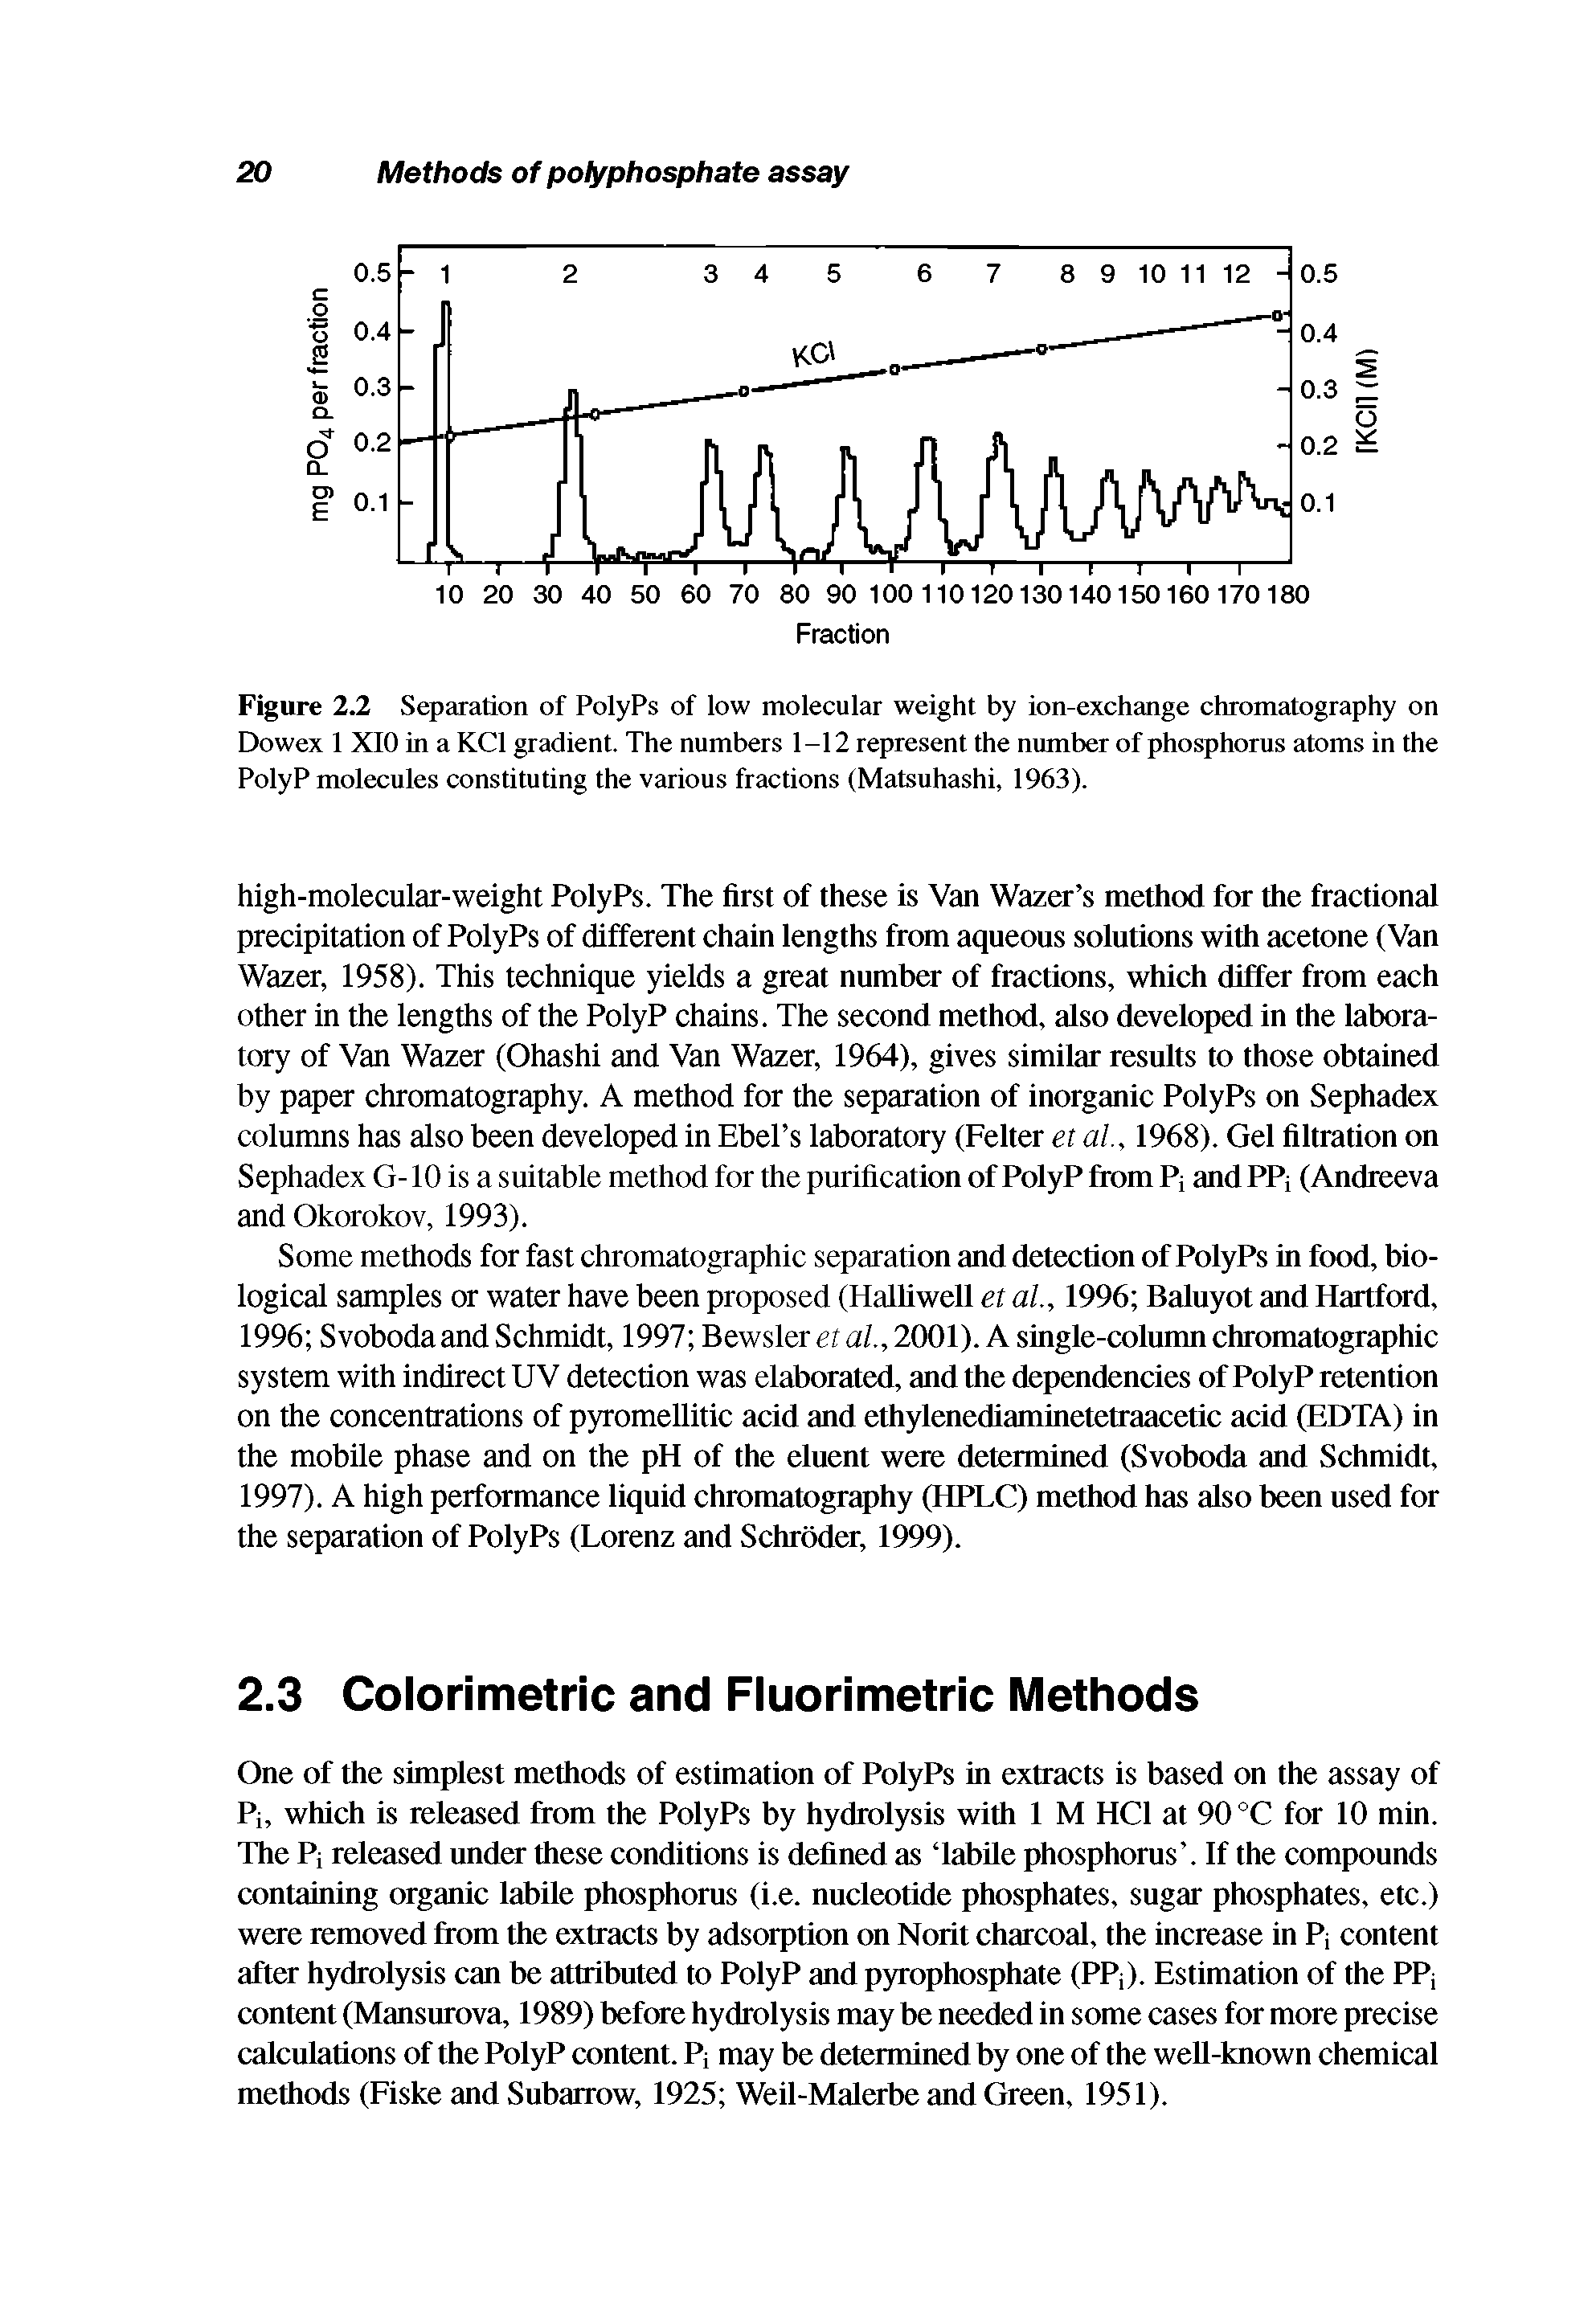 Figure 2.2 Separation of PolyPs of low molecular weight by ion-exchange chromatography on Dowex 1 XIO in a KC1 gradient. The numbers 1-12 represent the number of phosphorus atoms in the PolyP molecules constituting the various fractions (Matsuhashi, 1963).